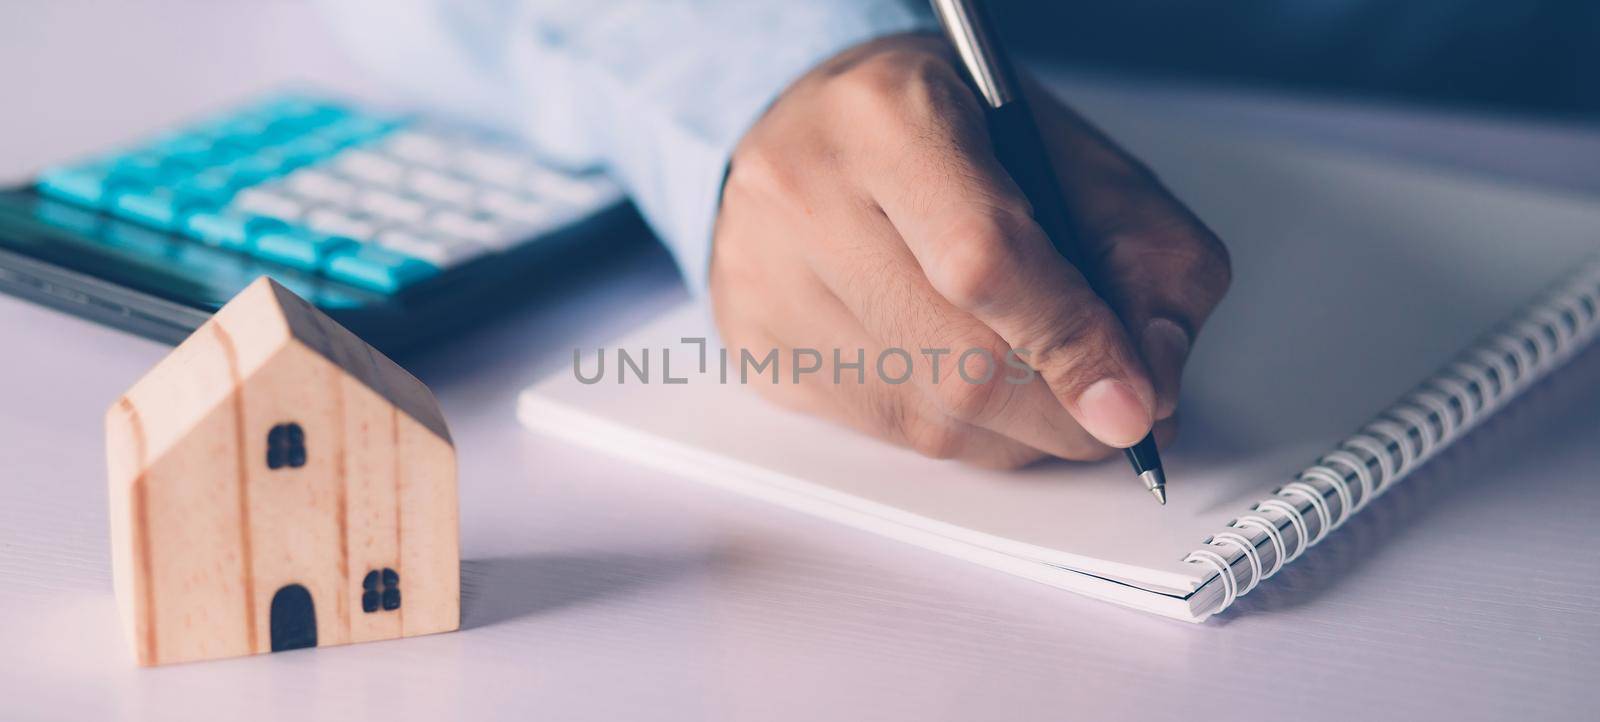 Hand of businessman planning and writing on note expense and mortgage with home, insurance house, finance and investment, calculate loan of residential, cost for refinance of property concept.